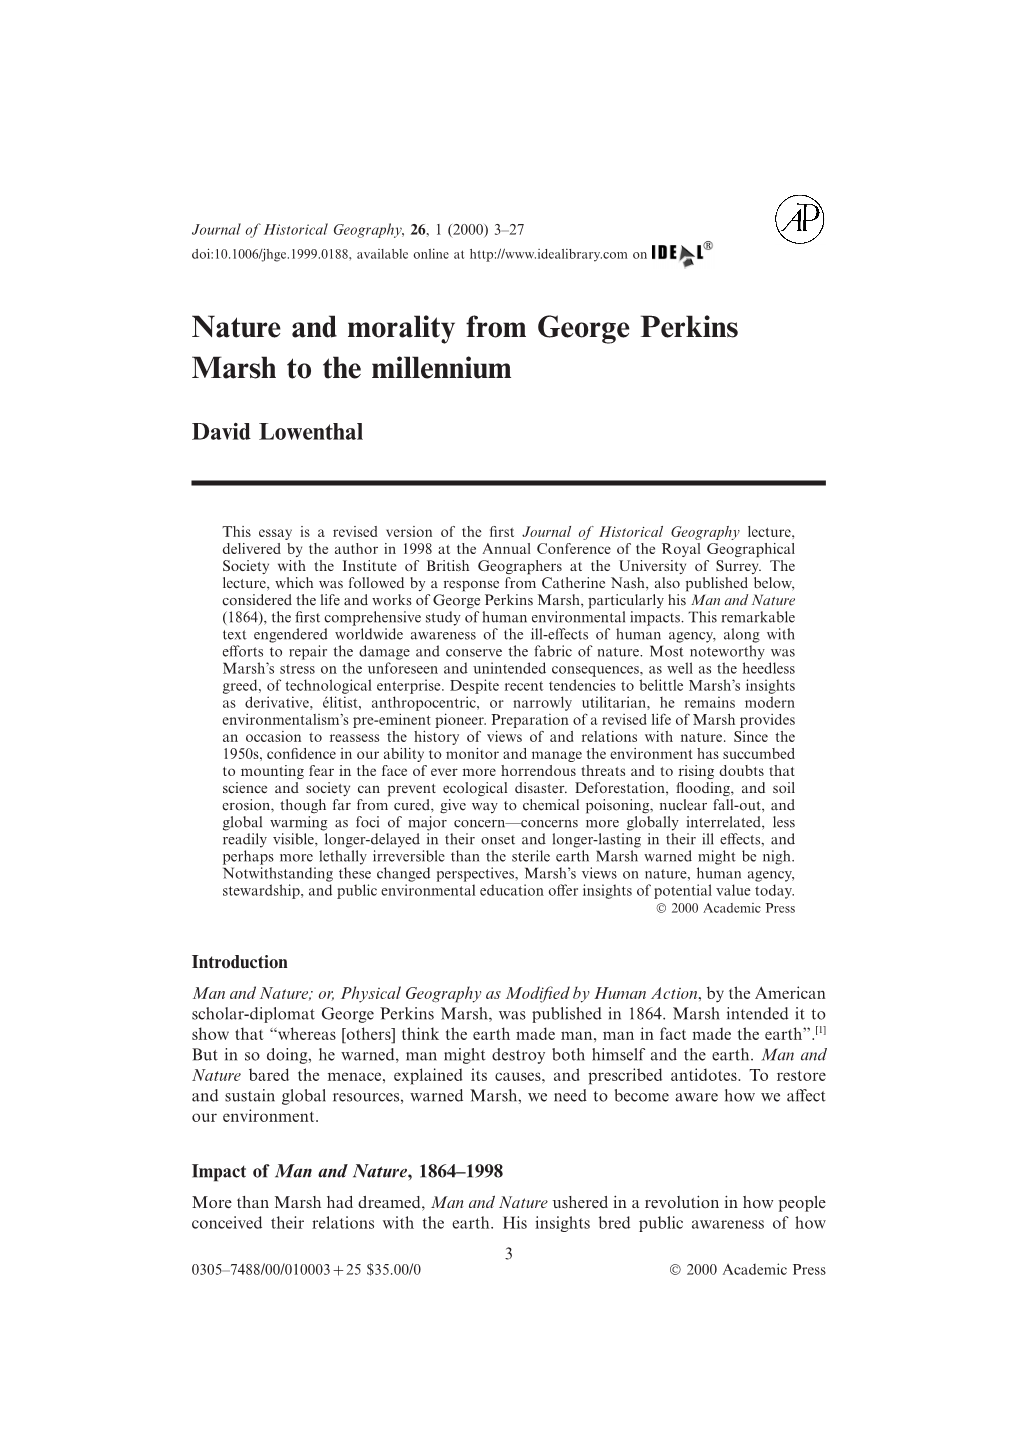 Nature and Morality from George Perkins Marsh to the Millennium